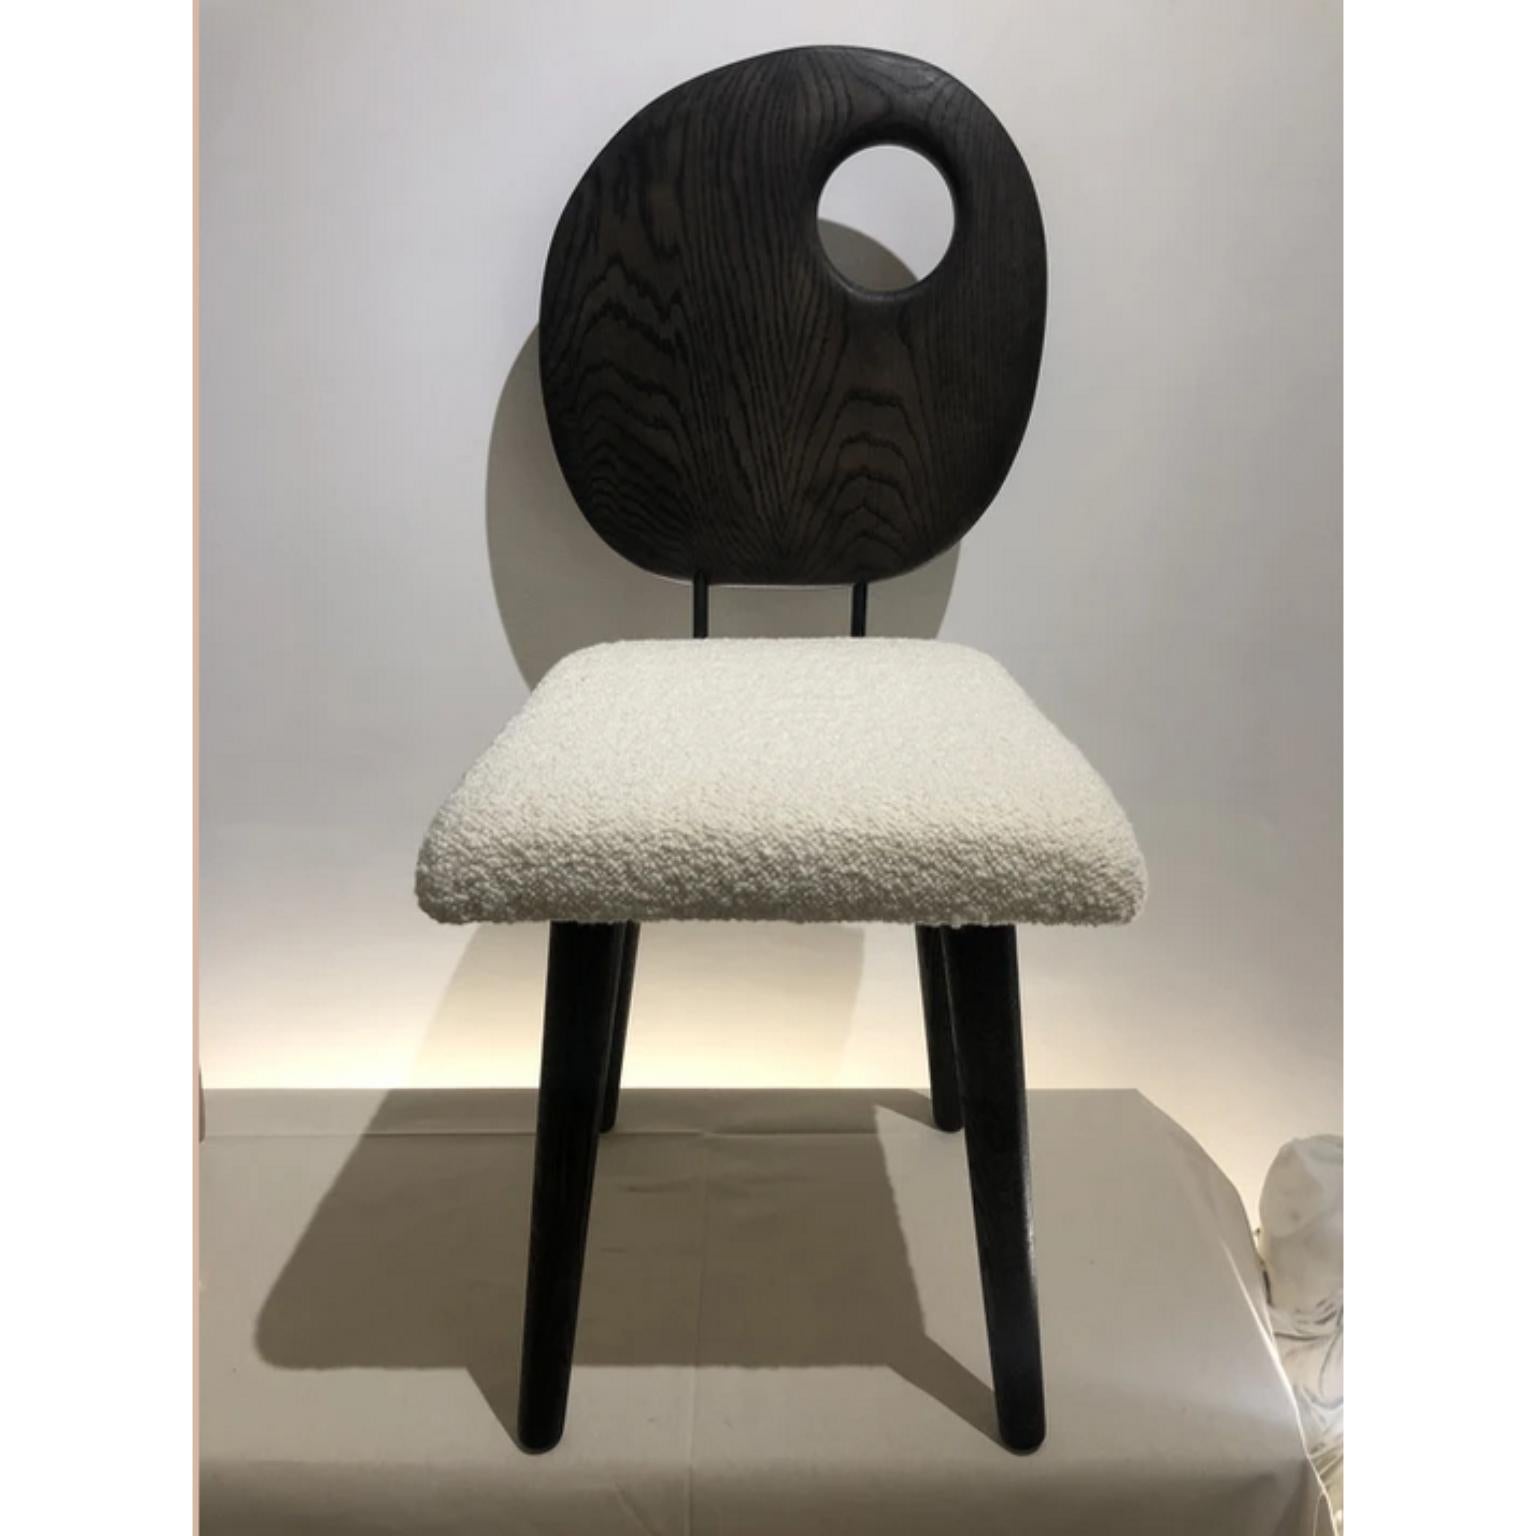 Pebble chair by Fred Rigby Studio
Dimensions: L 39.5 x W 41.2 x H 91 cm
Materials: Solid oak, dedar boucle weave wool

Fred Rigby Studio is a London-based furniture and interior design practice founded by Fred Rigby in 2008. The independent